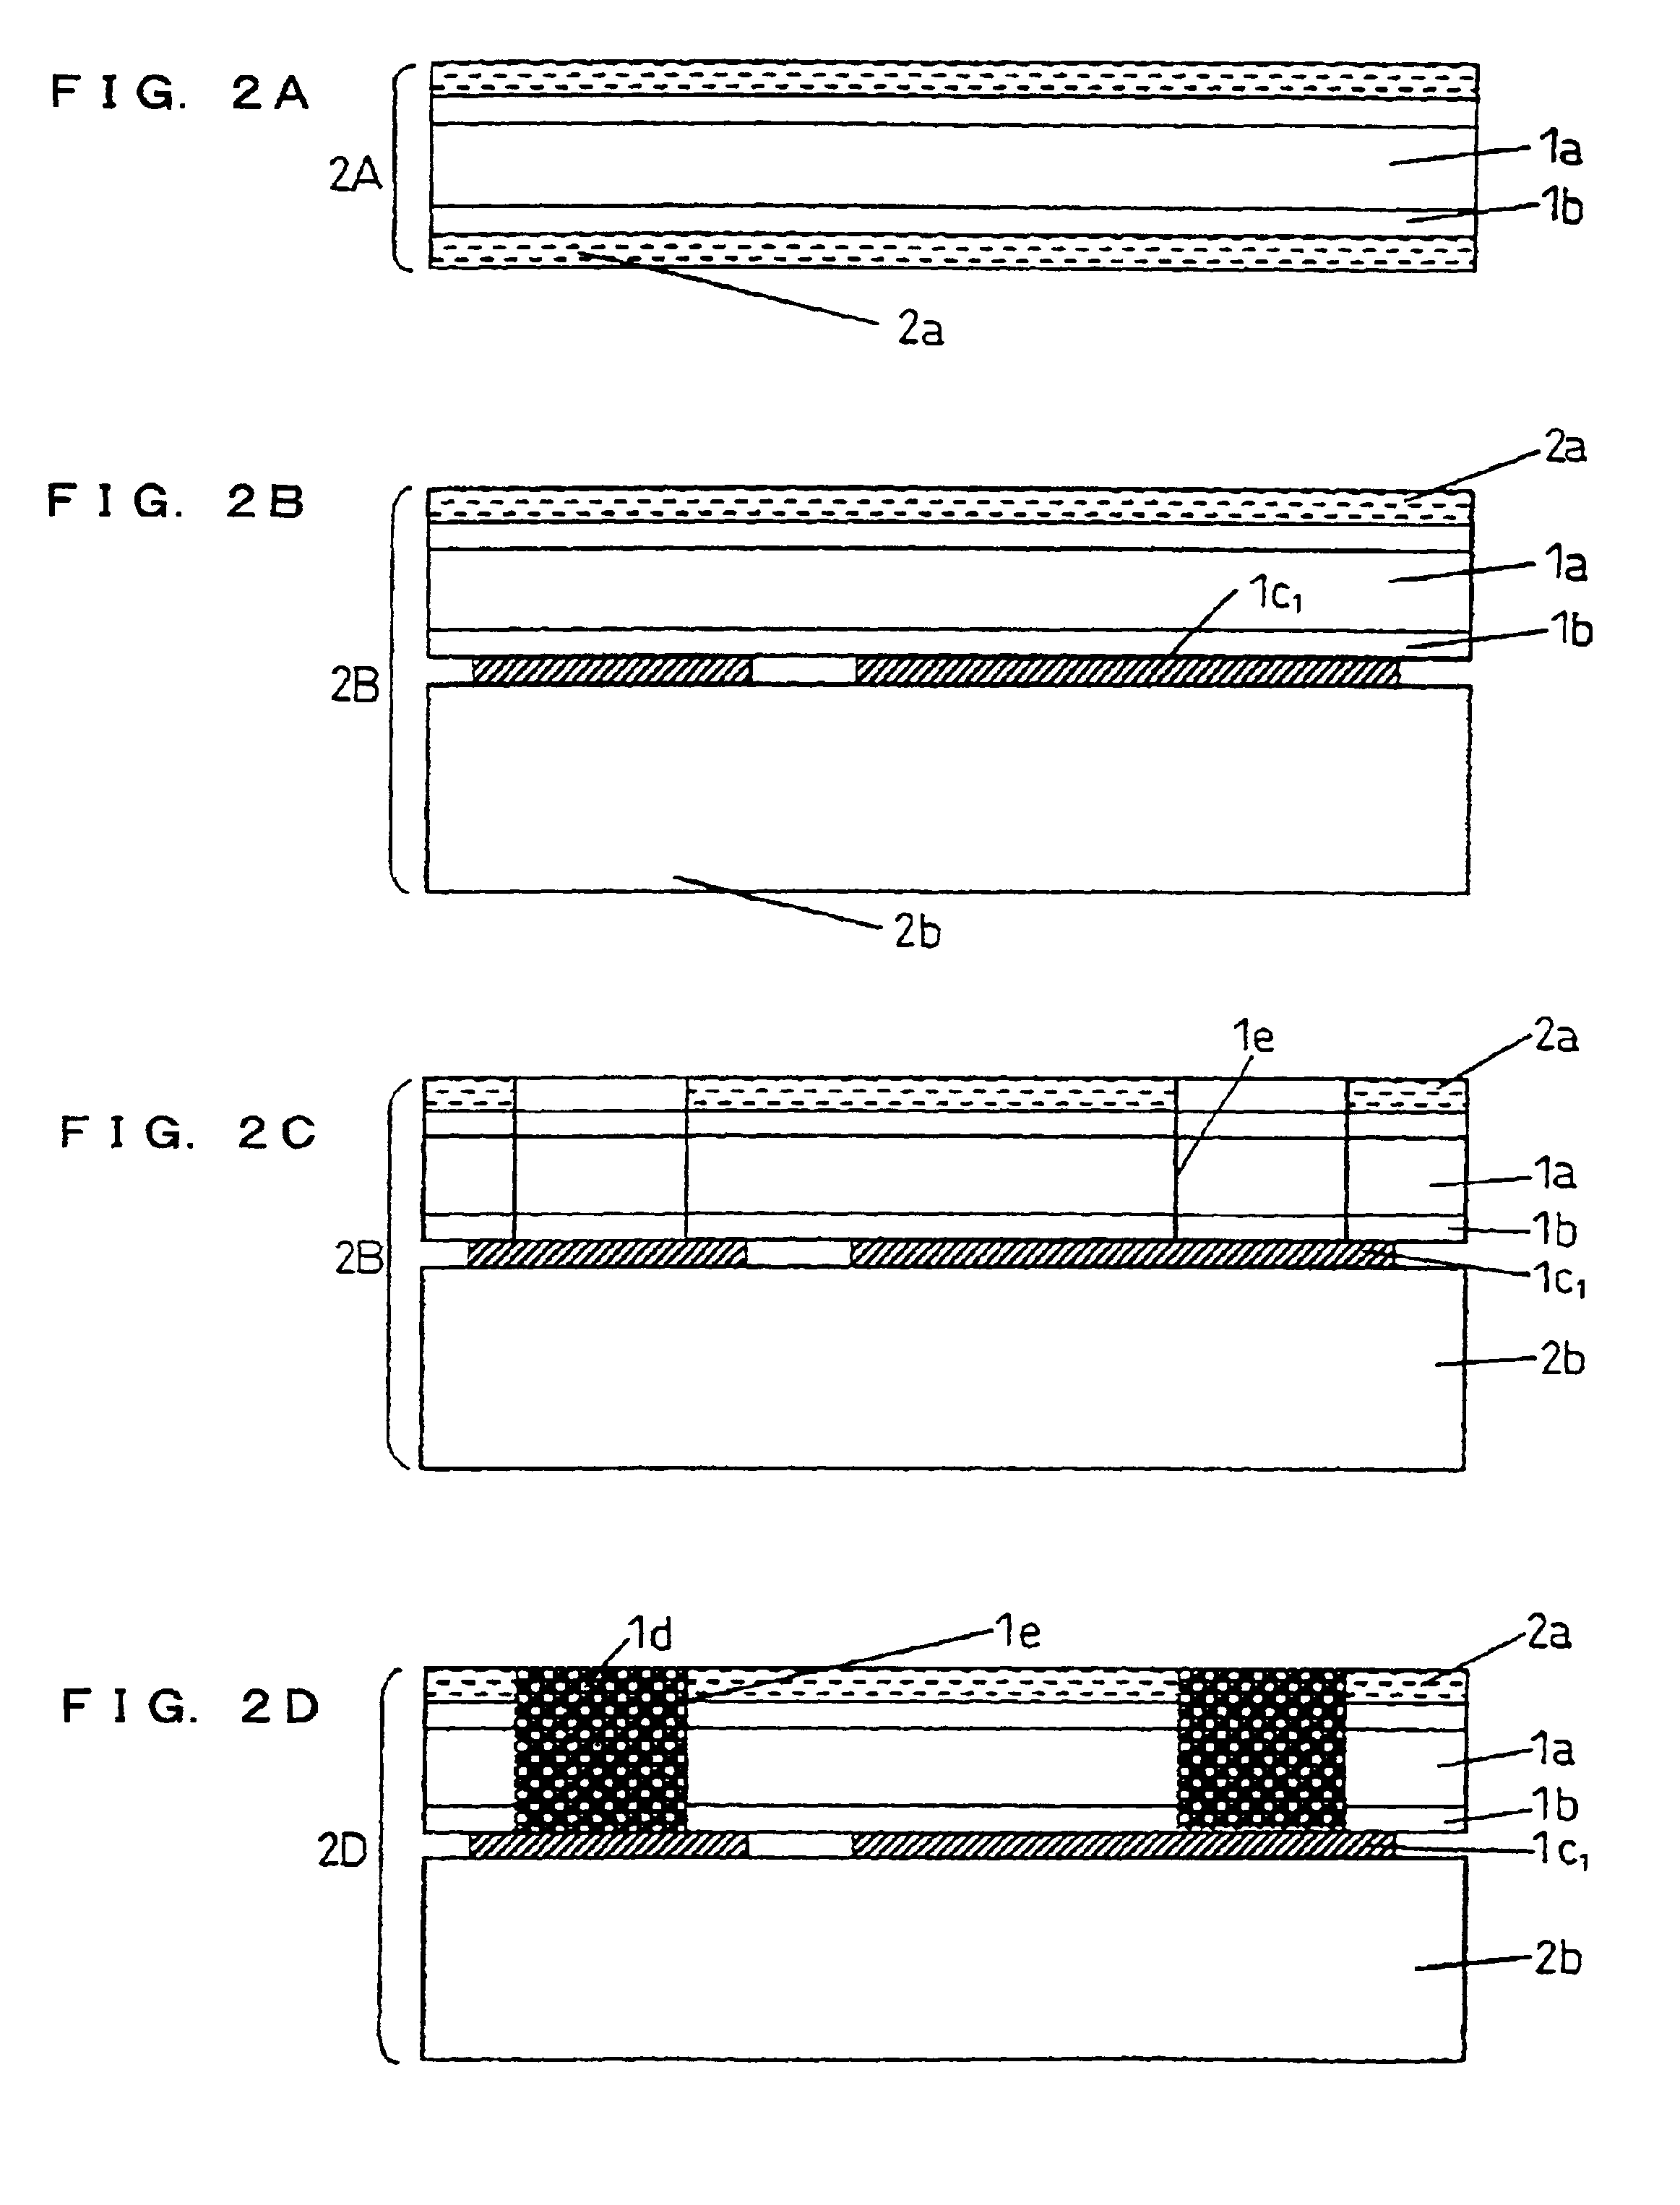 Circuit substrate having improved connection reliability and a method for manufacturing the same